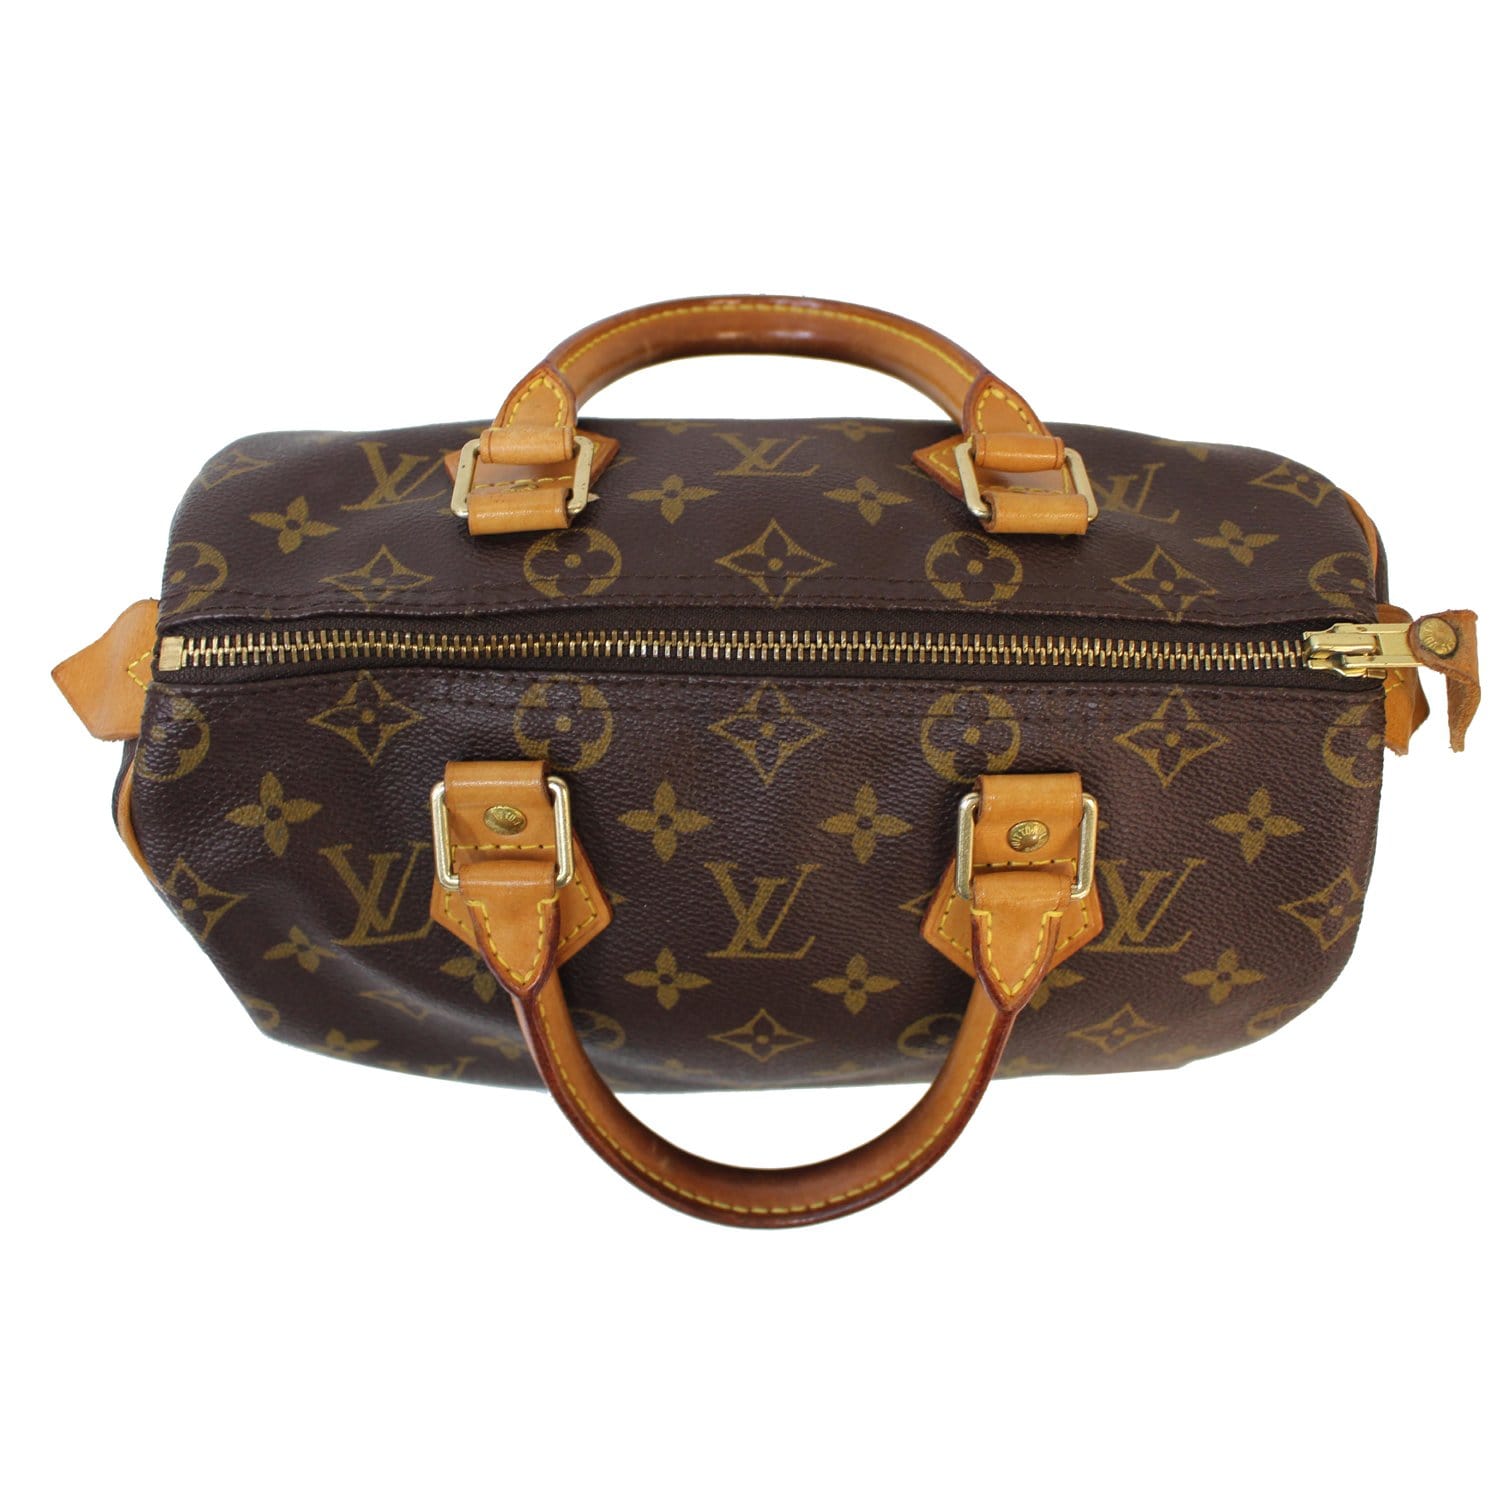 Louis Vuitton speedy 25 monogram with dust bag and base shaper